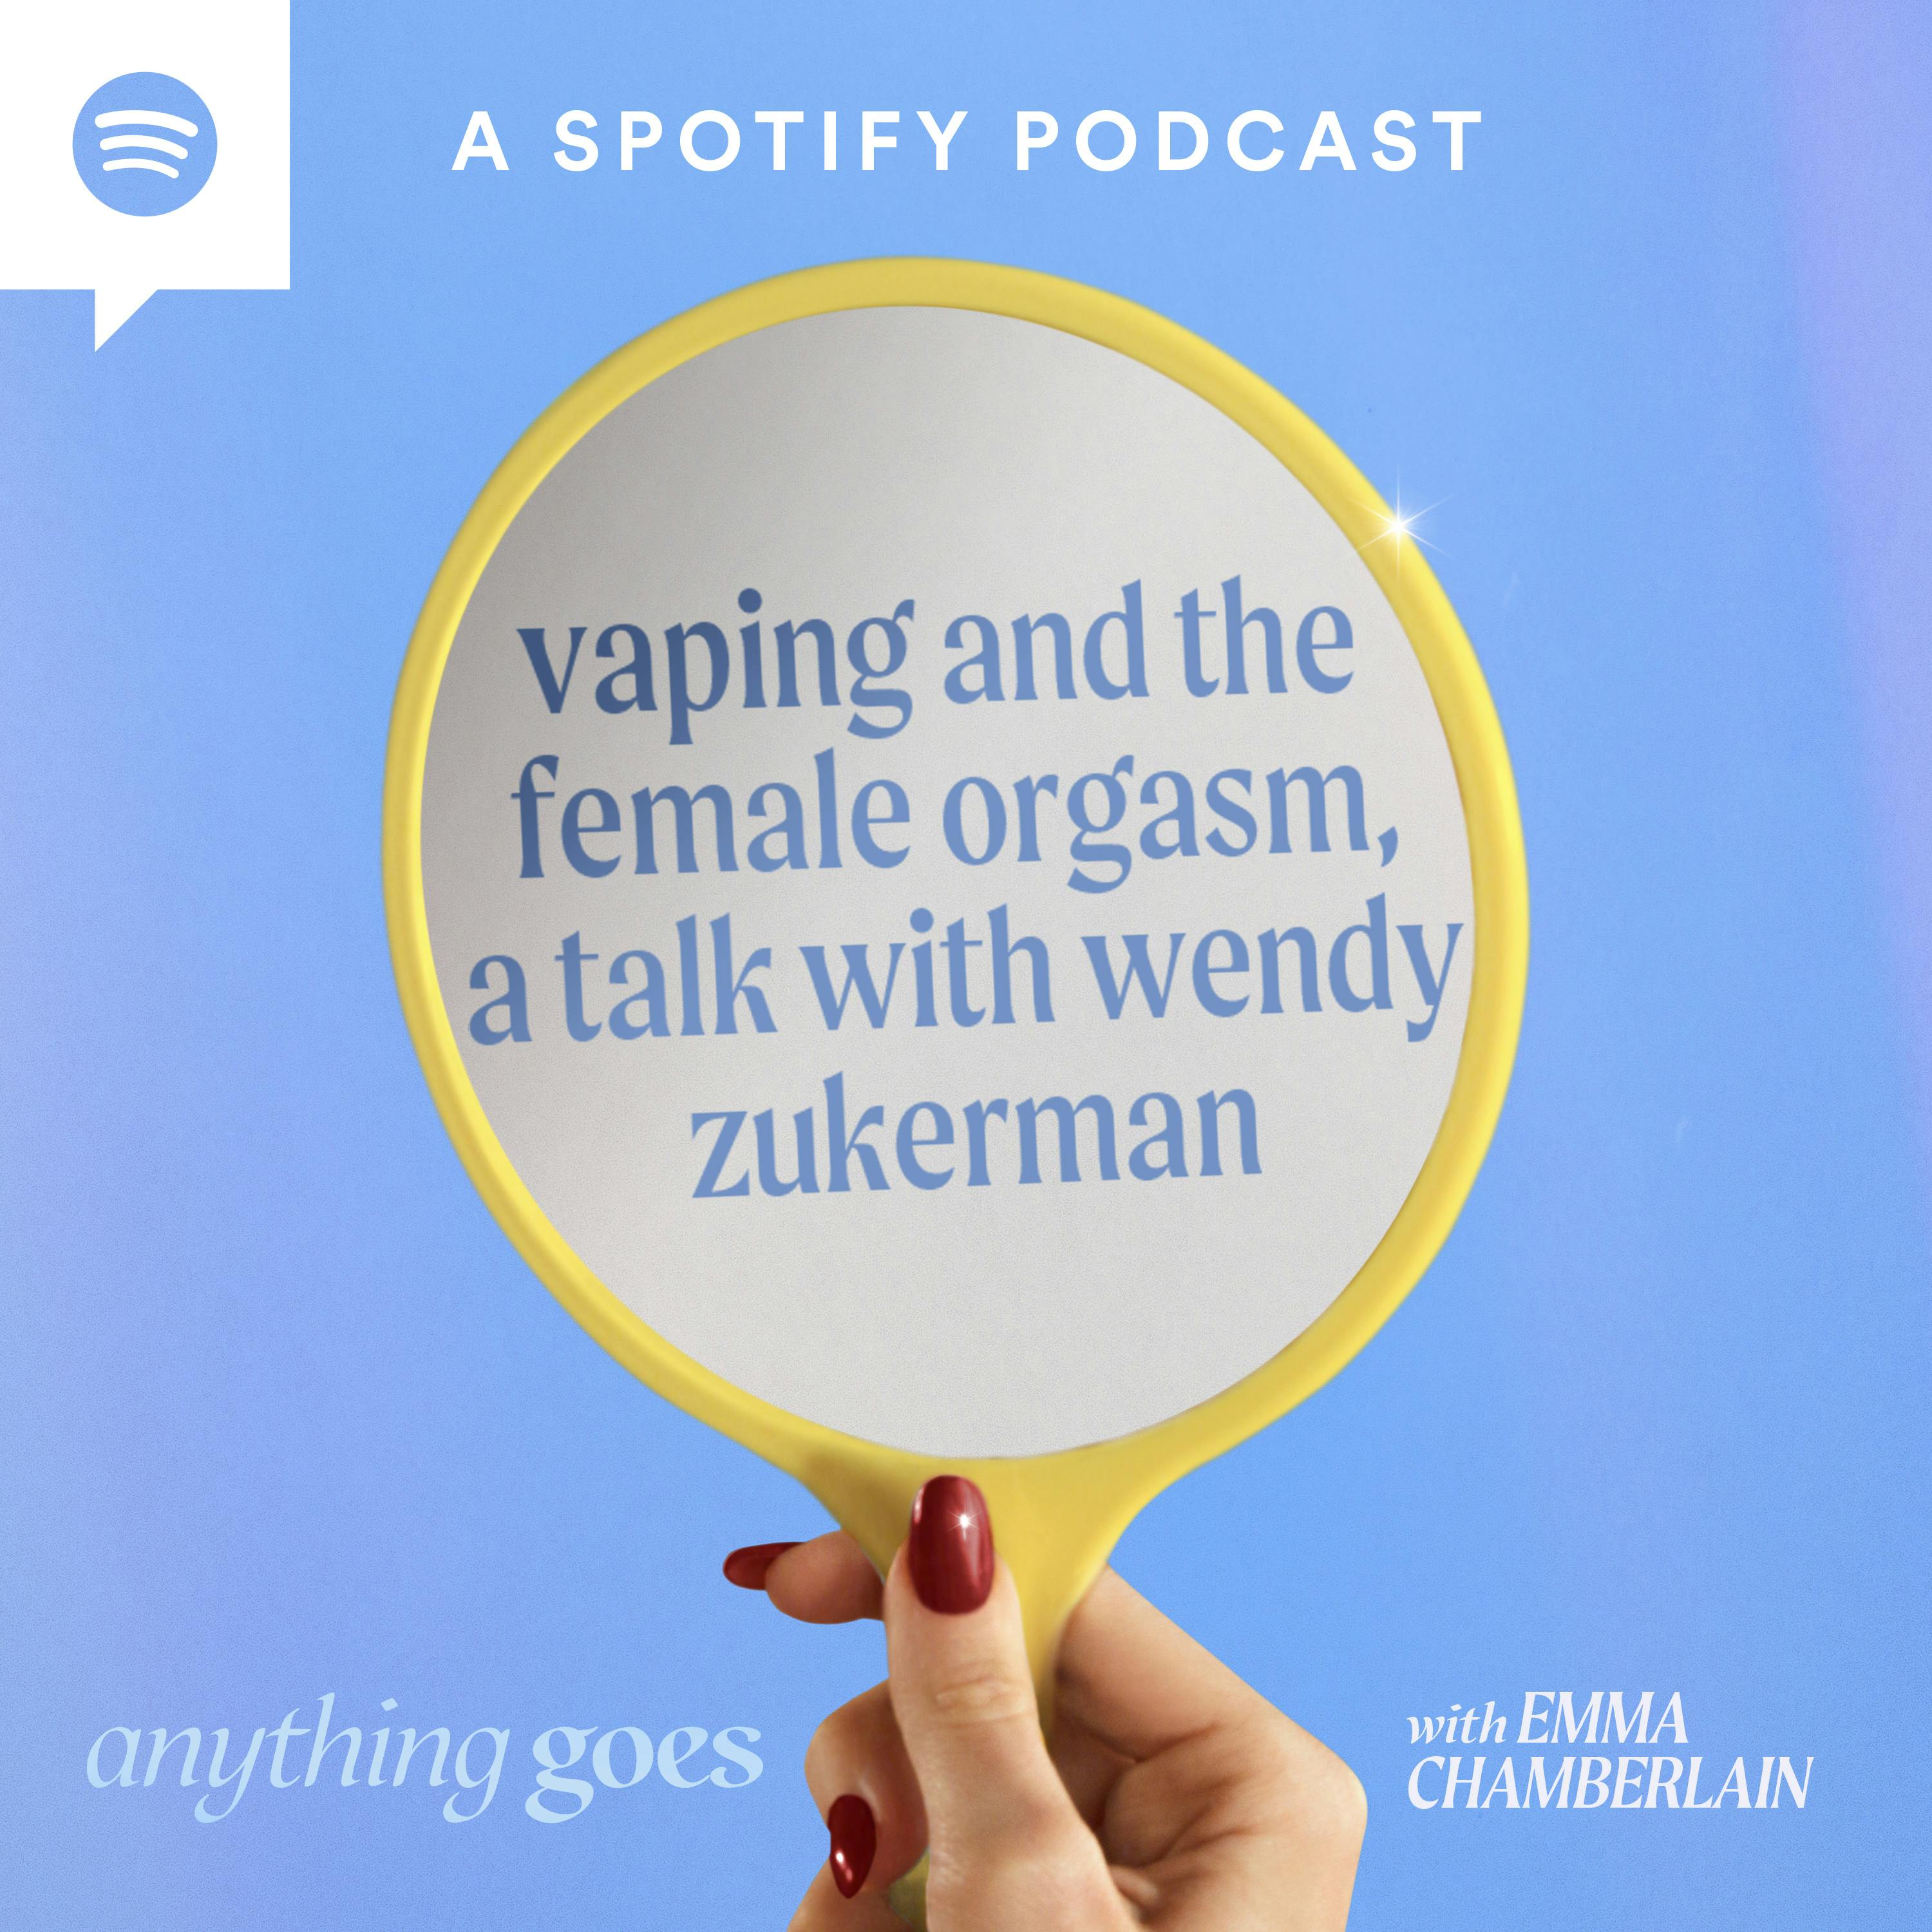 vaping and the female orgasm, a talk with wendy zukerman [video]